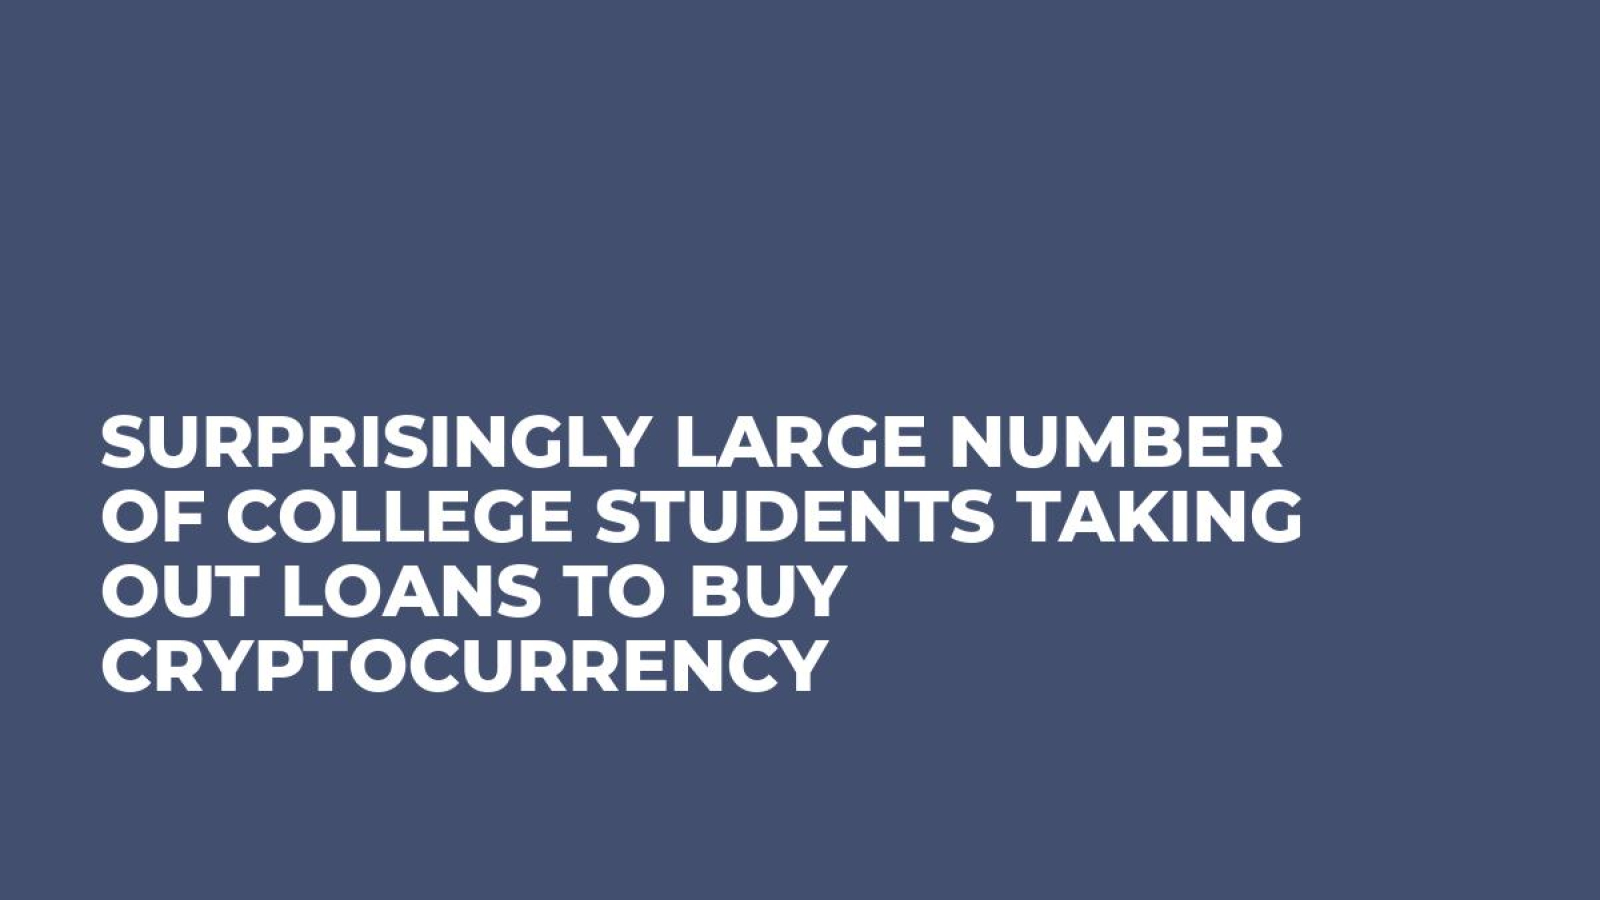 Surprisingly Large Number of College Students Taking Out Loans to Buy Cryptocurrency